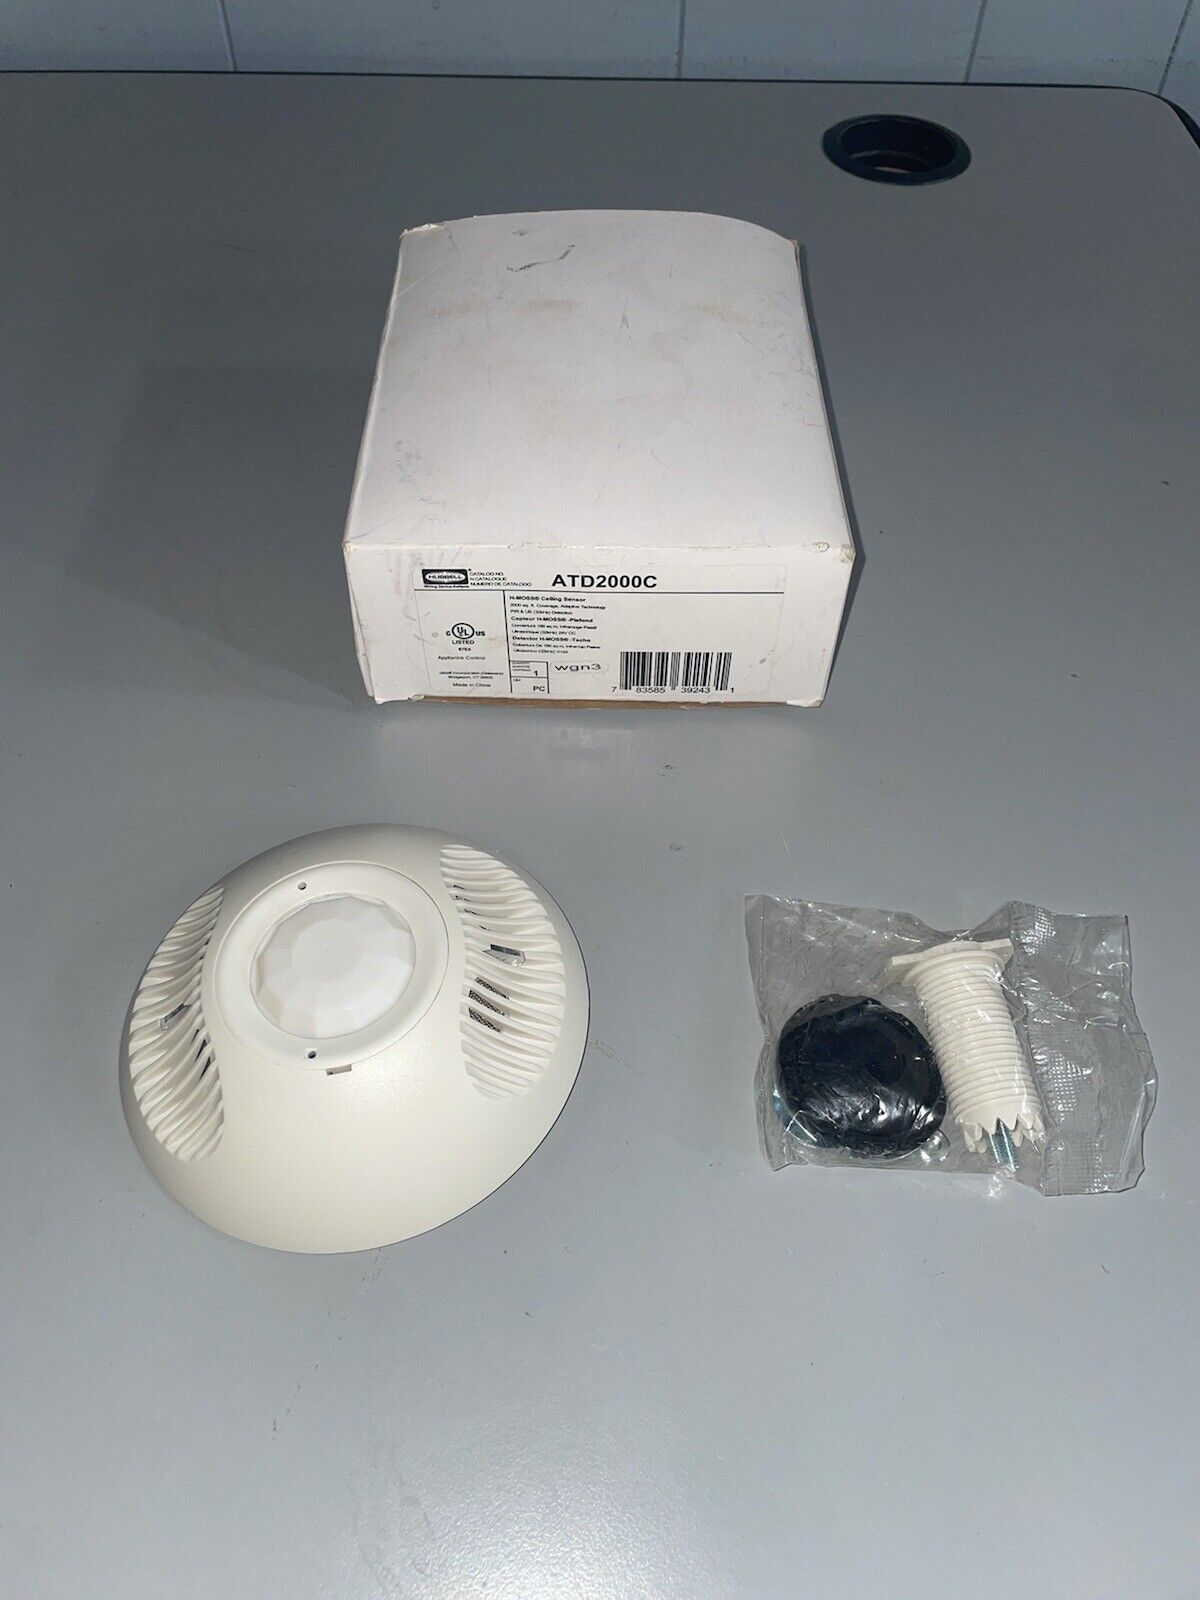 Hubbell Ceiling Sensor ATD2000C - NEW with FREE PRIORITY SHIPPING